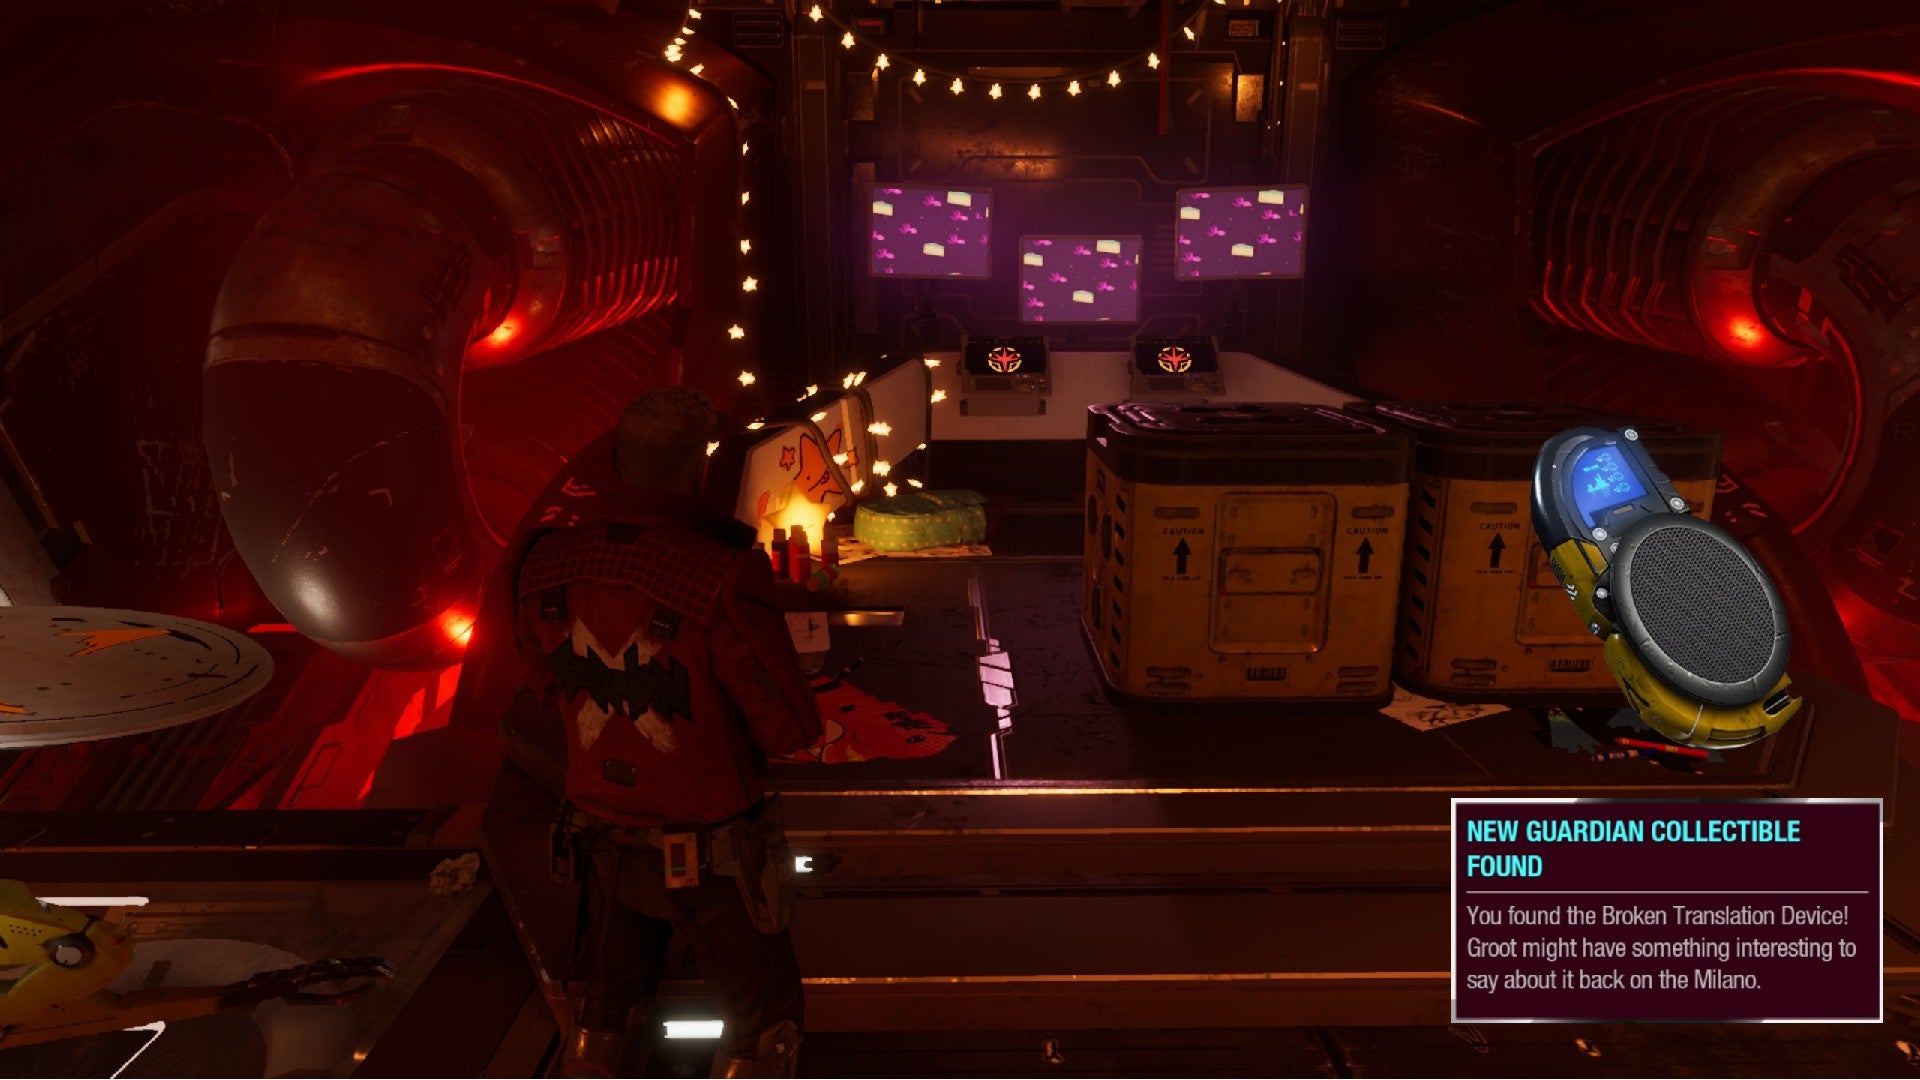 Star-Lord stands in Nikki's hideout, pink screens up ahead with crates on the floor nearby.